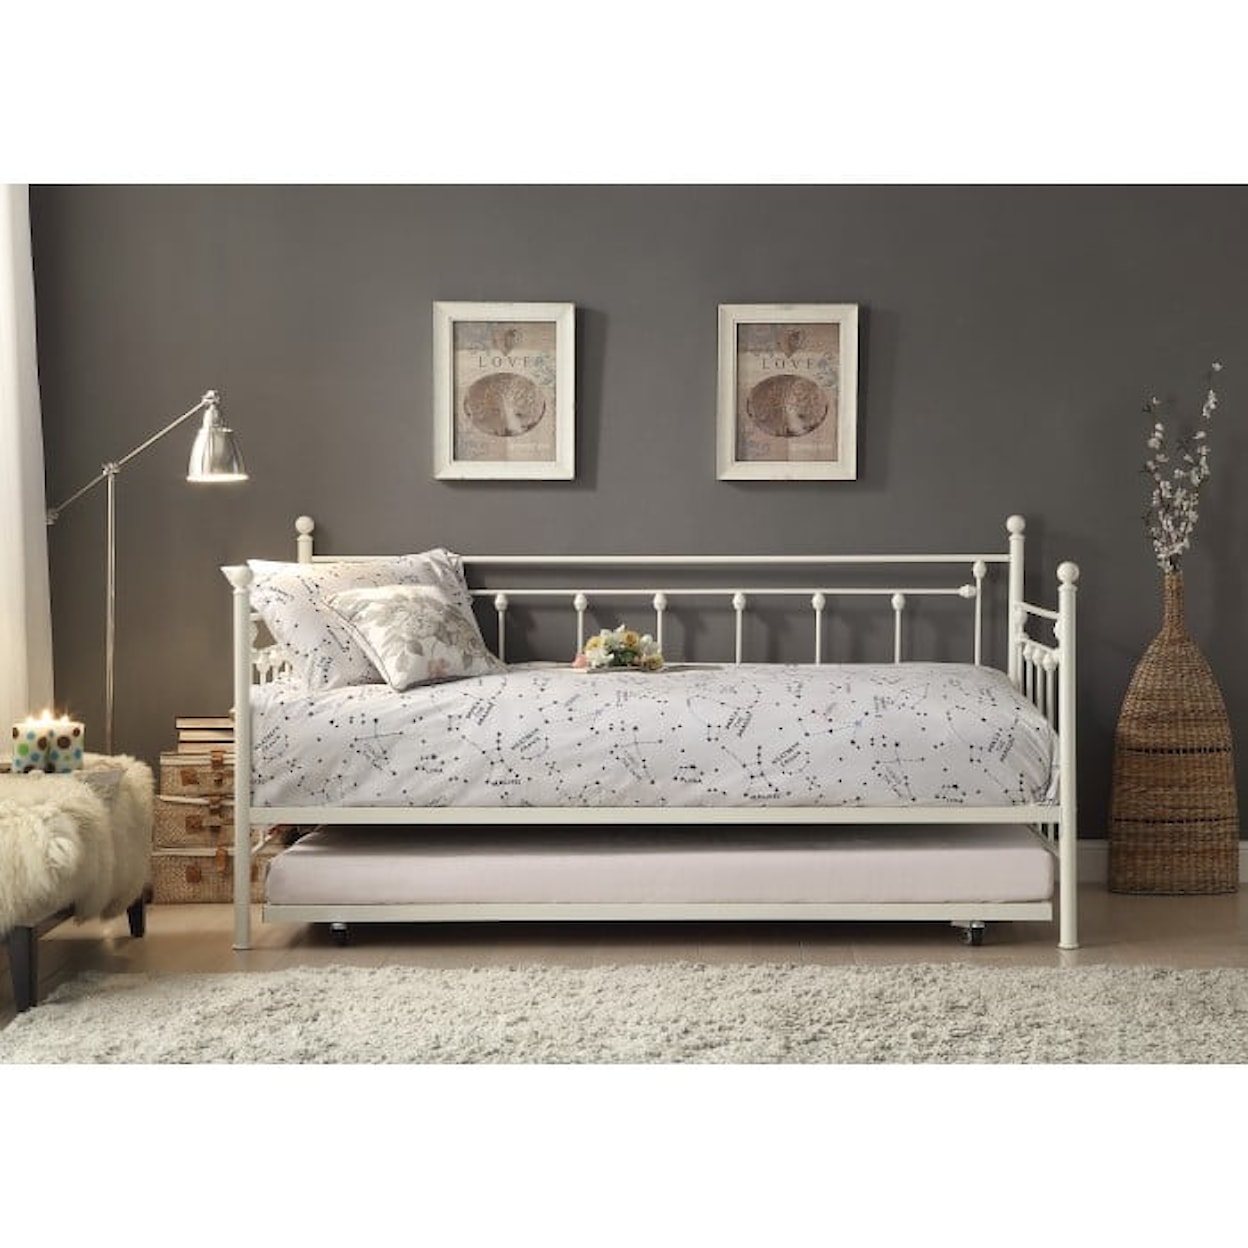 Homelegance Lorena Daybed with Trundle